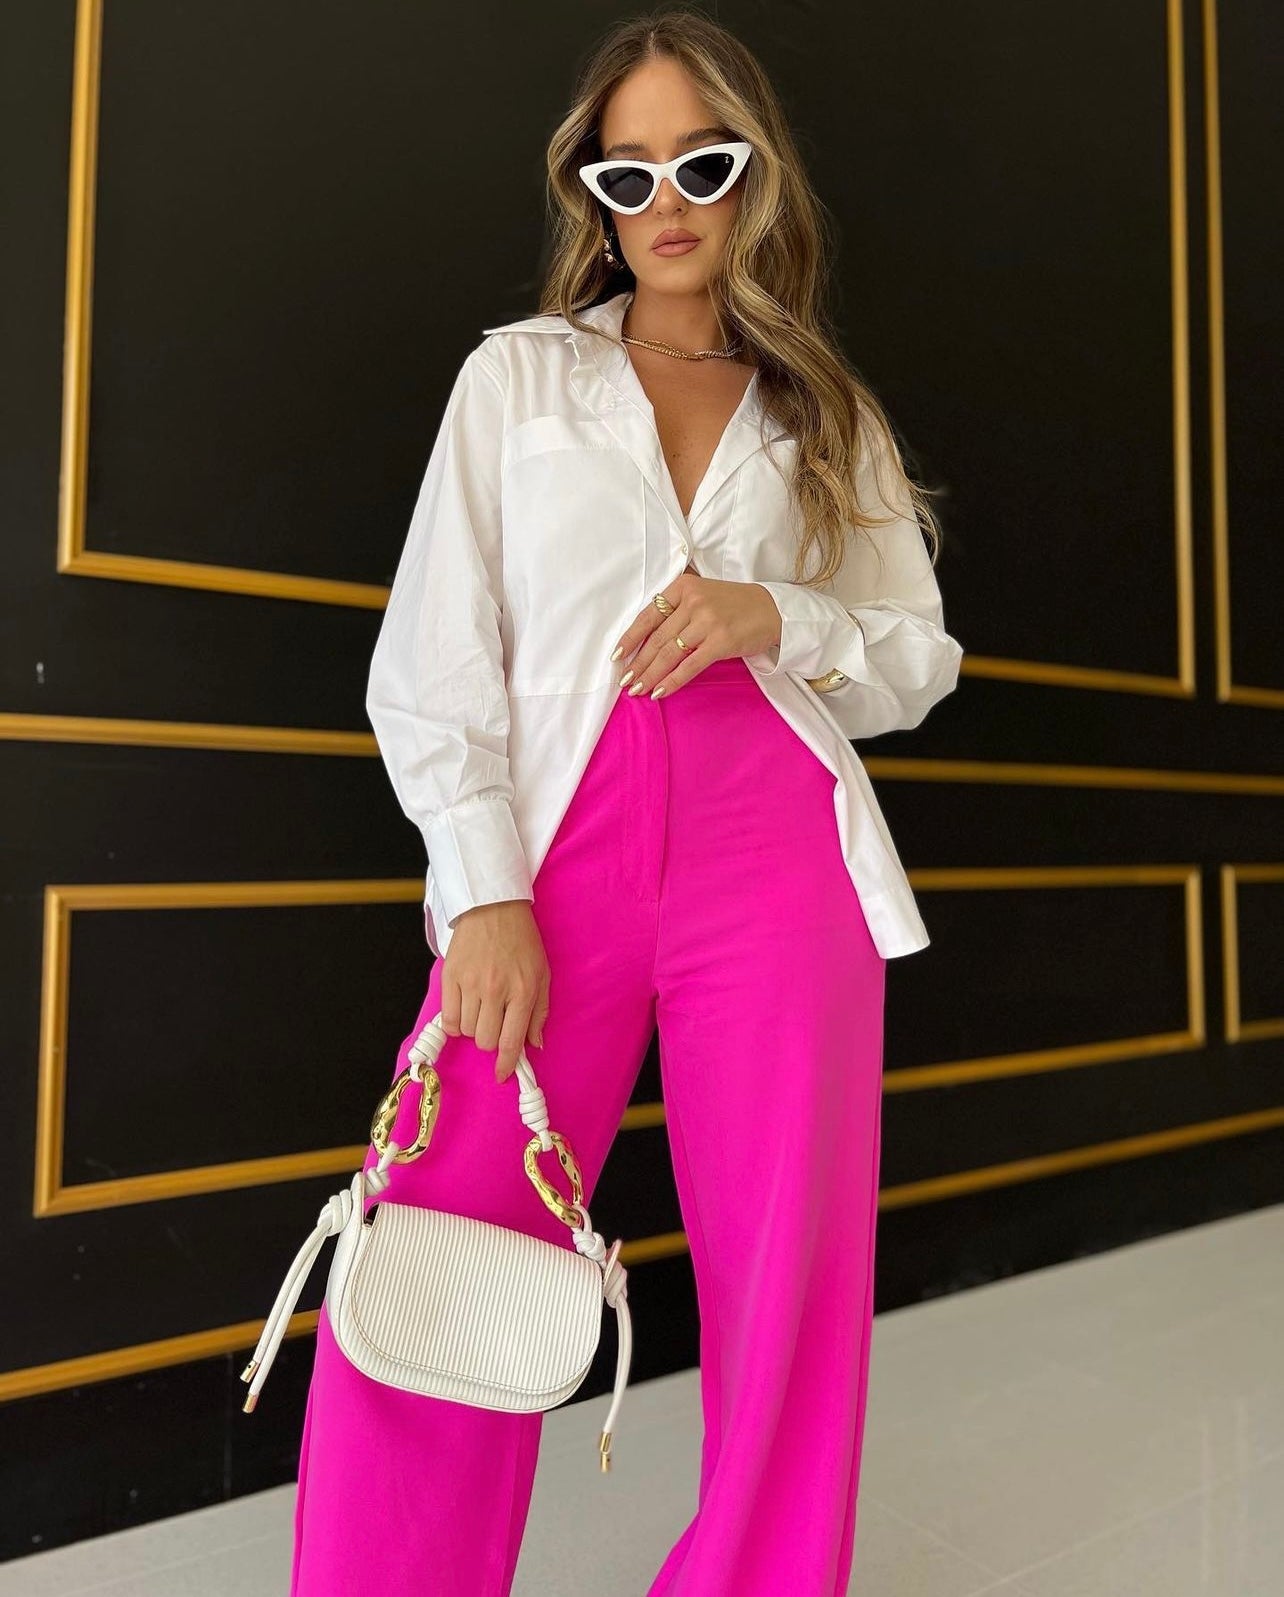 Pin on Classic + Feminine Outfits and Style